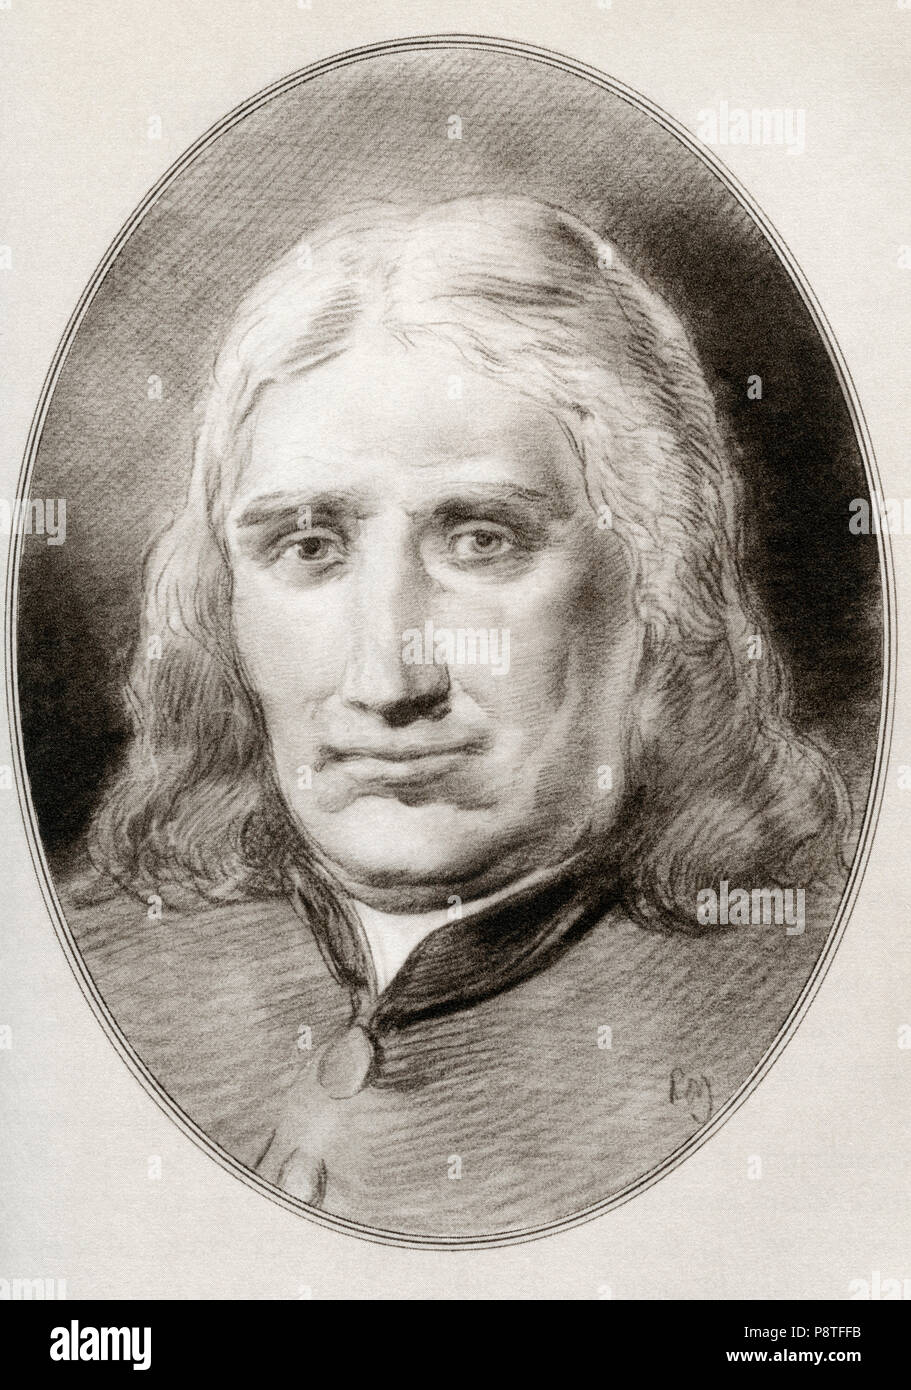 George Fox, 1624 -1691.  English Dissenter and a founder of the Religious Society of Friends, commonly known as the Quakers or Friends.   Illustration by Gordon Ross, American artist and illustrator (1873-1946), from Living Biographies of Religious Leaders. Stock Photo